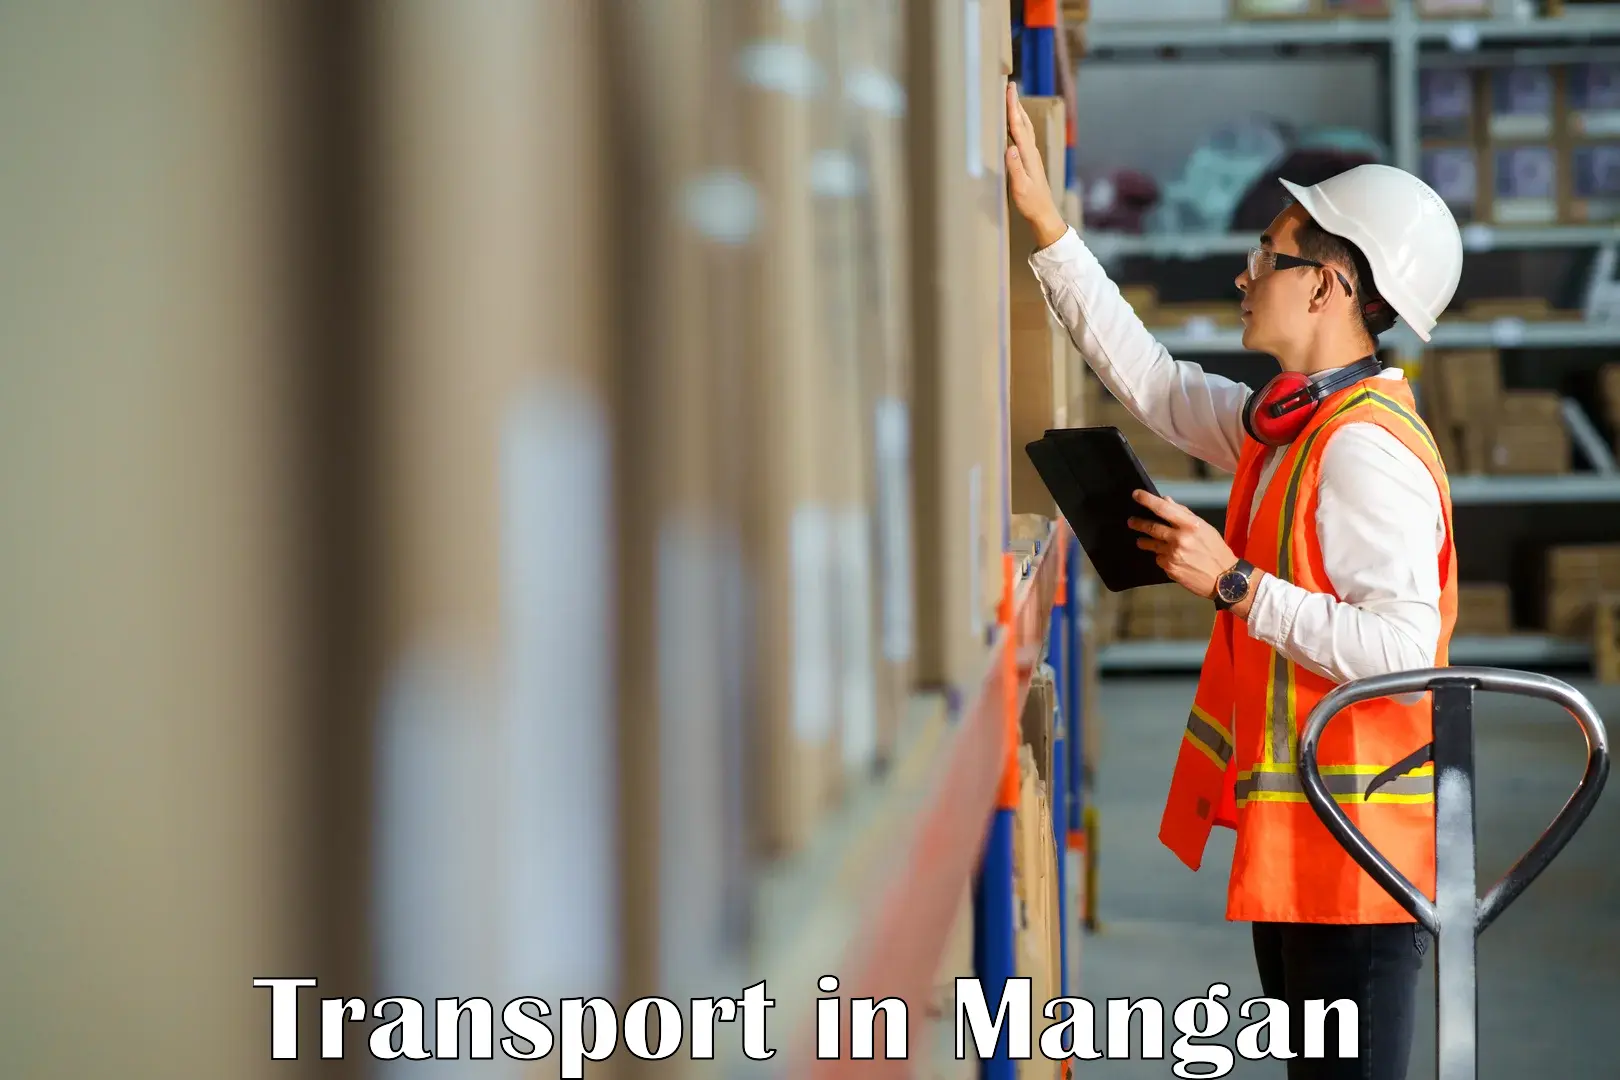 Domestic transport services in Mangan